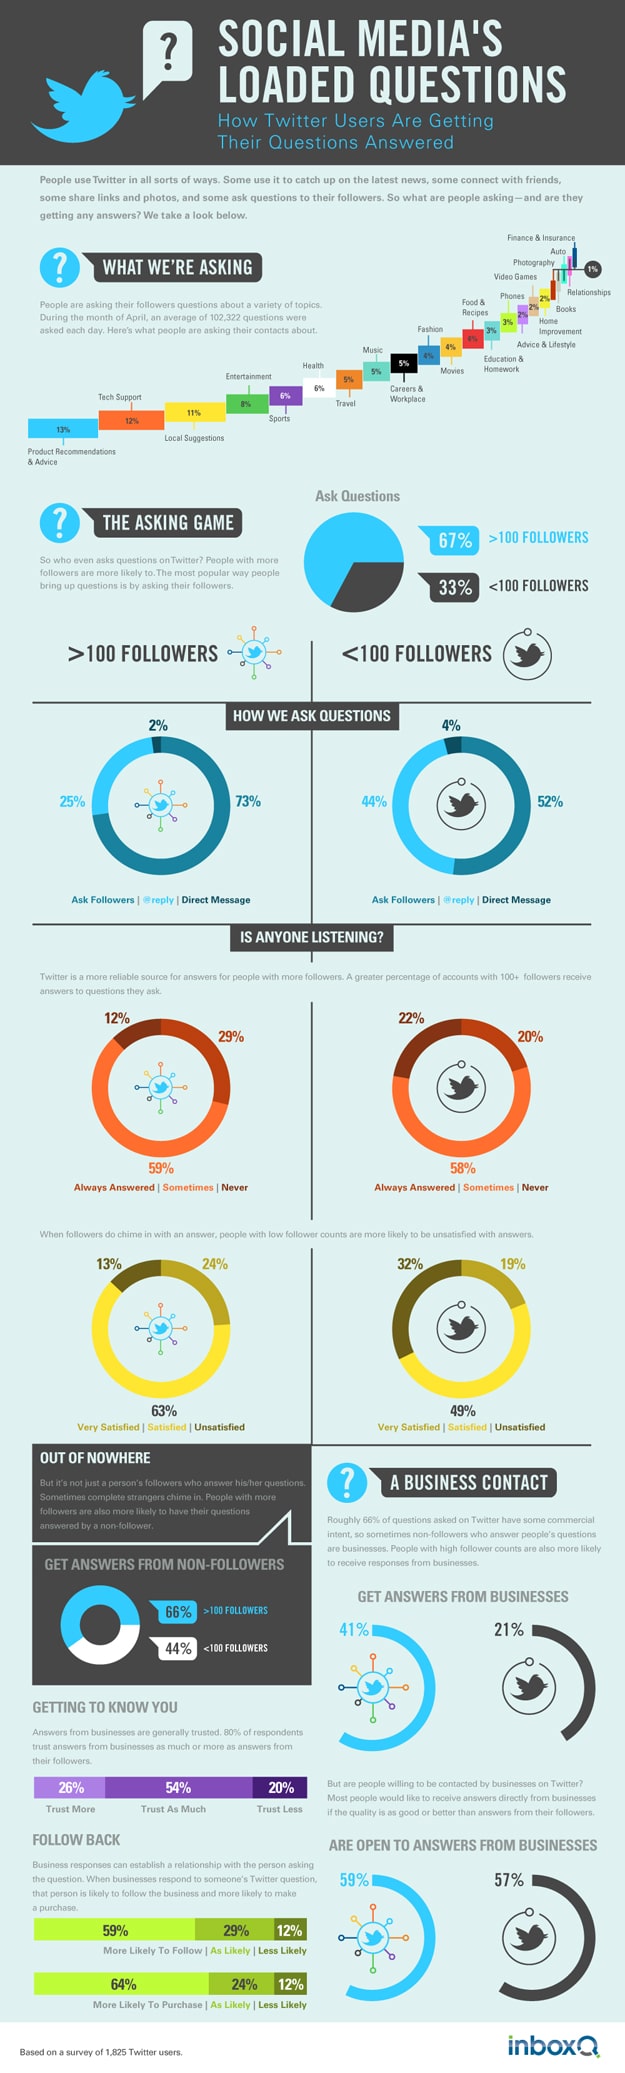 How Effective Is Twitter For Asking Questions? [Infographic]